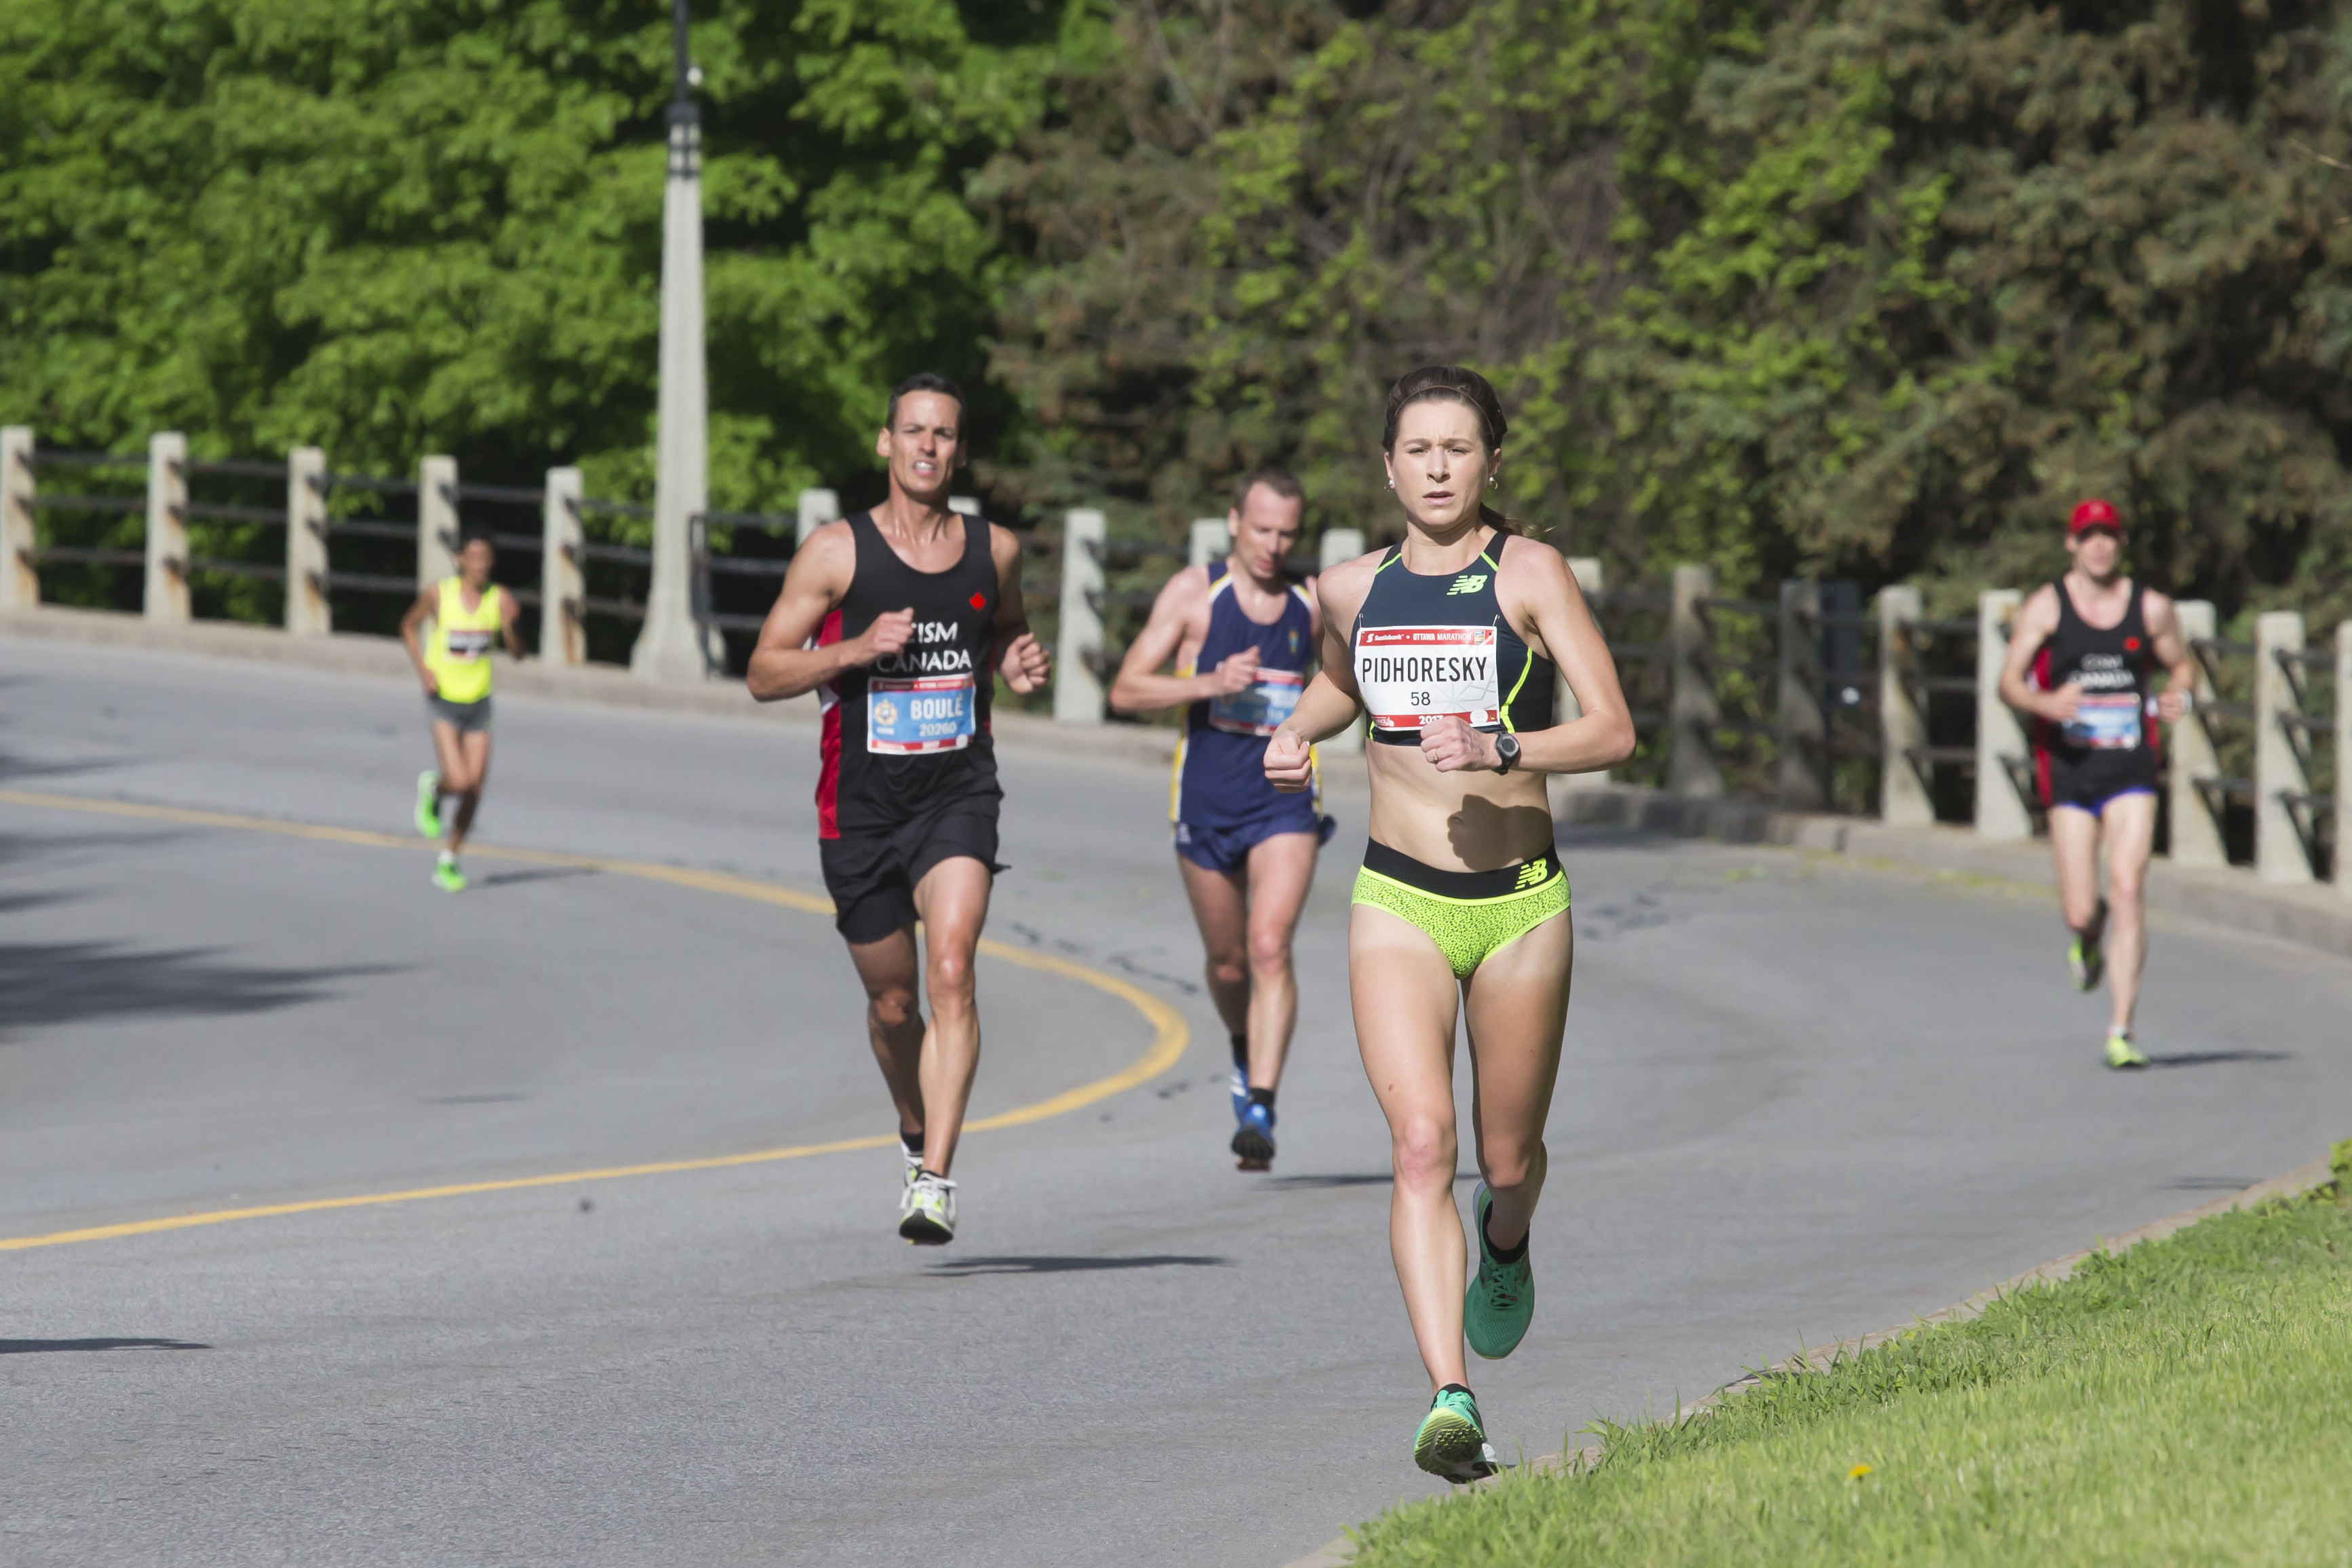 Dayna Pidhoresky running to finish top Canadian in the Ottawa Marathon road race during the Tamarack Ottawa Race Weekend. The Ottawa Marathon is part of the International Amateur Athletics Federation (IAAF) ‘Gold’ series of international road races.